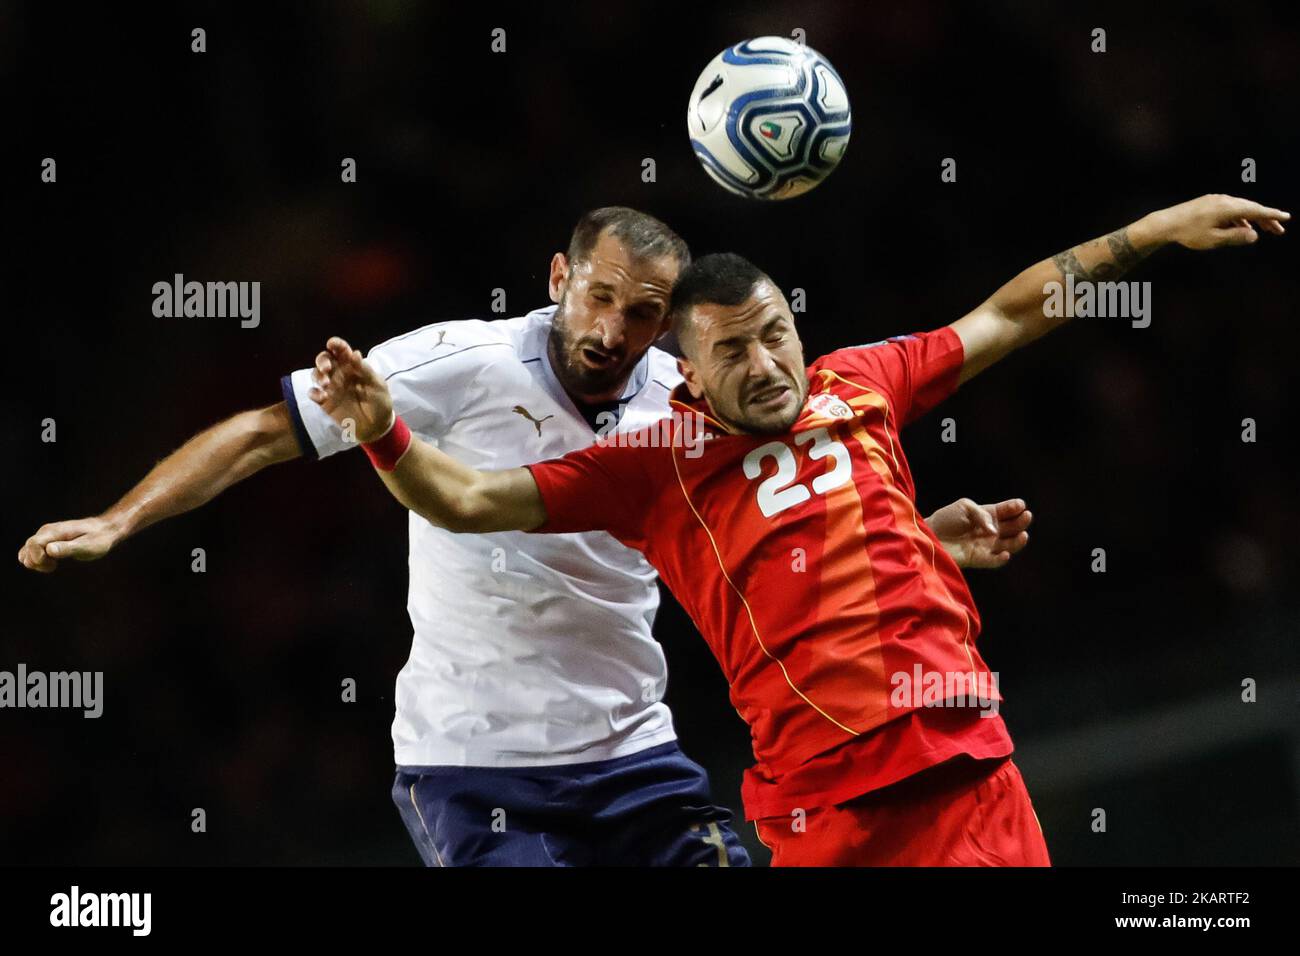 Giorgio Chiellini (L) of Italy national team and Ilija Nestorovski of FYR Macedonia national team vie for a header during the 2018 FIFA World Cup Russia qualifier Group G football match between Italy and FYR Macedonia at Stadio Olimpico on October 6, 2017 in Turin, Italy. (Photo by Mike Kireev/NurPhoto) Stock Photo